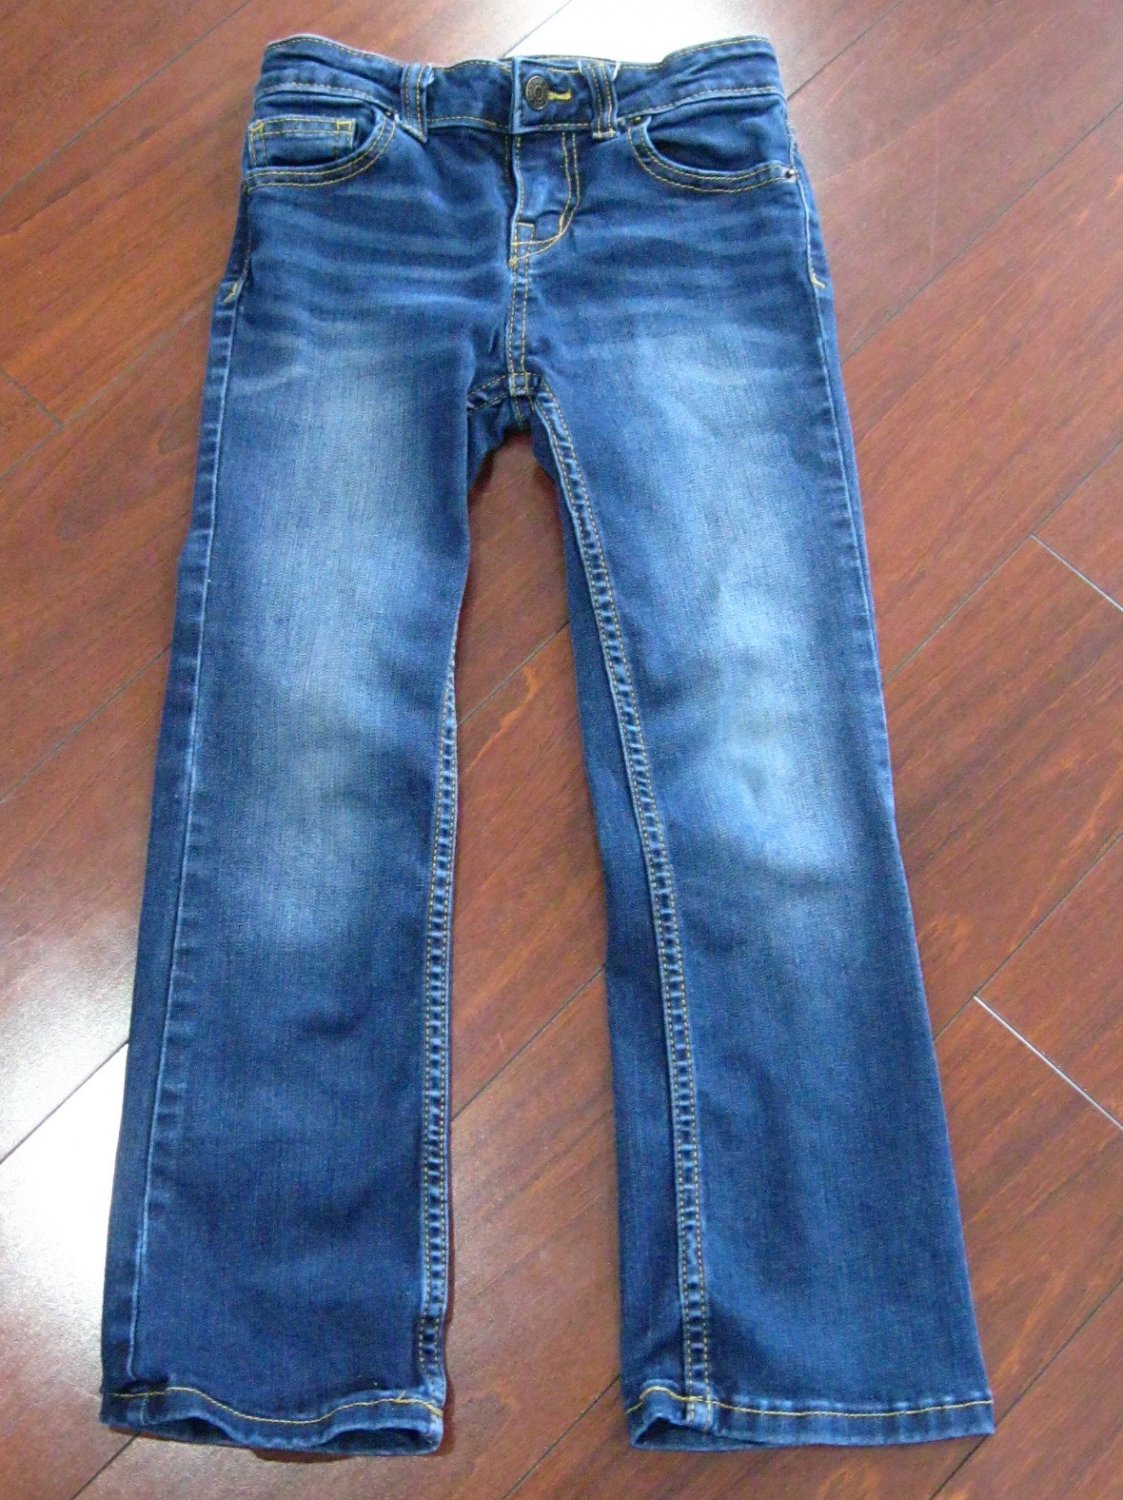 Dark Wash Blue Jeans CAT AND JACK Bootcut Pants Girls Size 6 Super Stretch EX